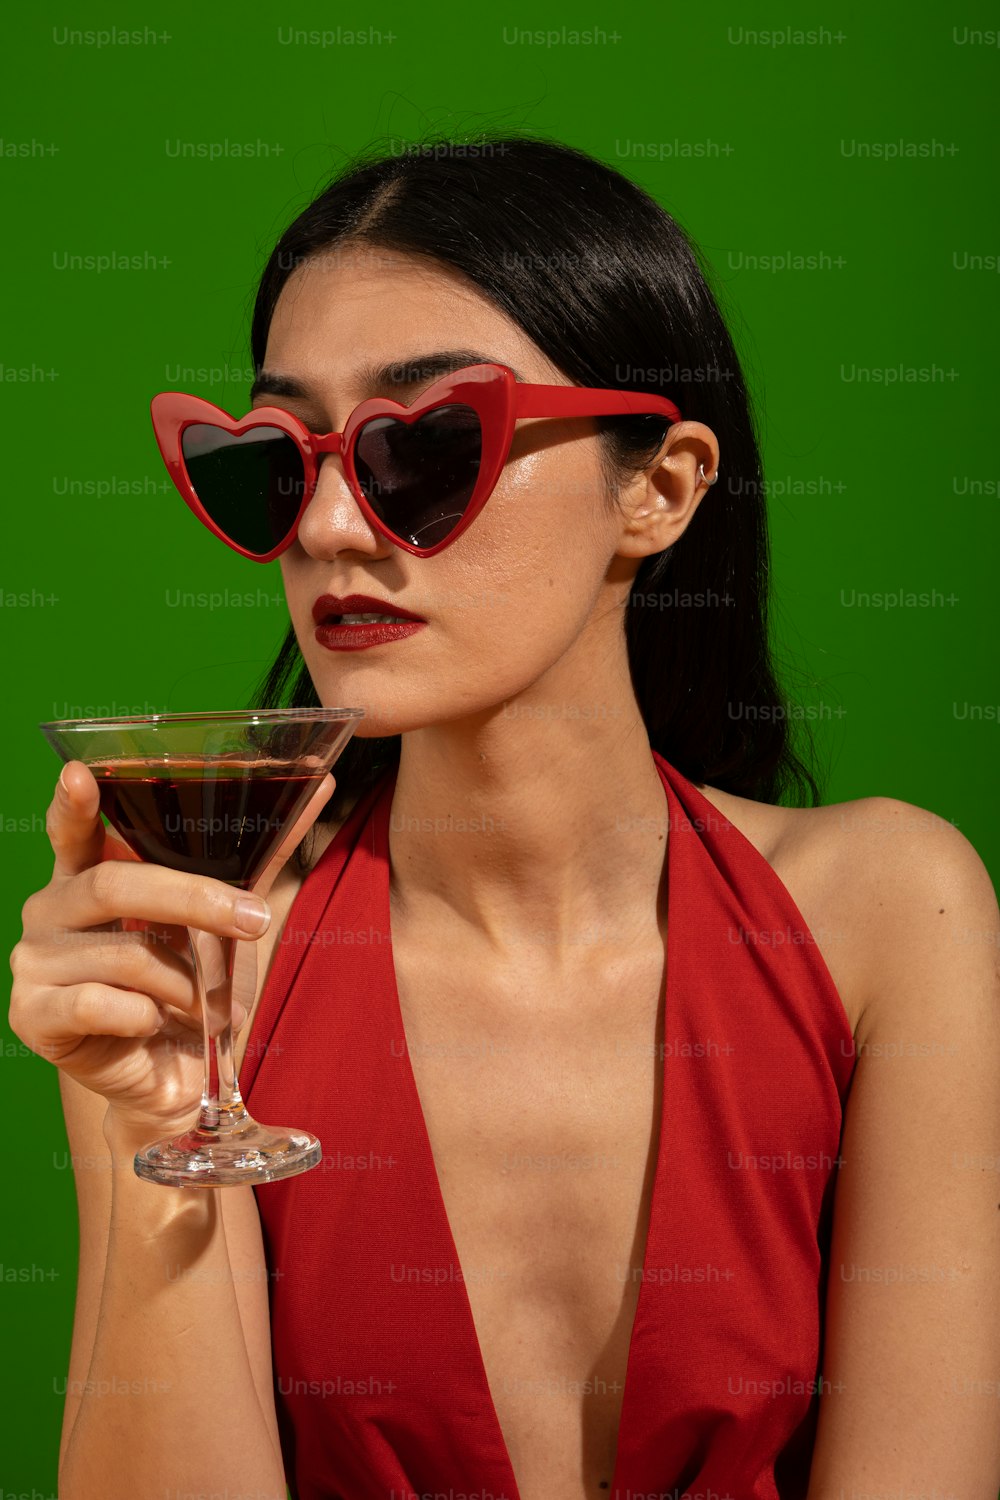 a woman in a red dress holding a wine glass